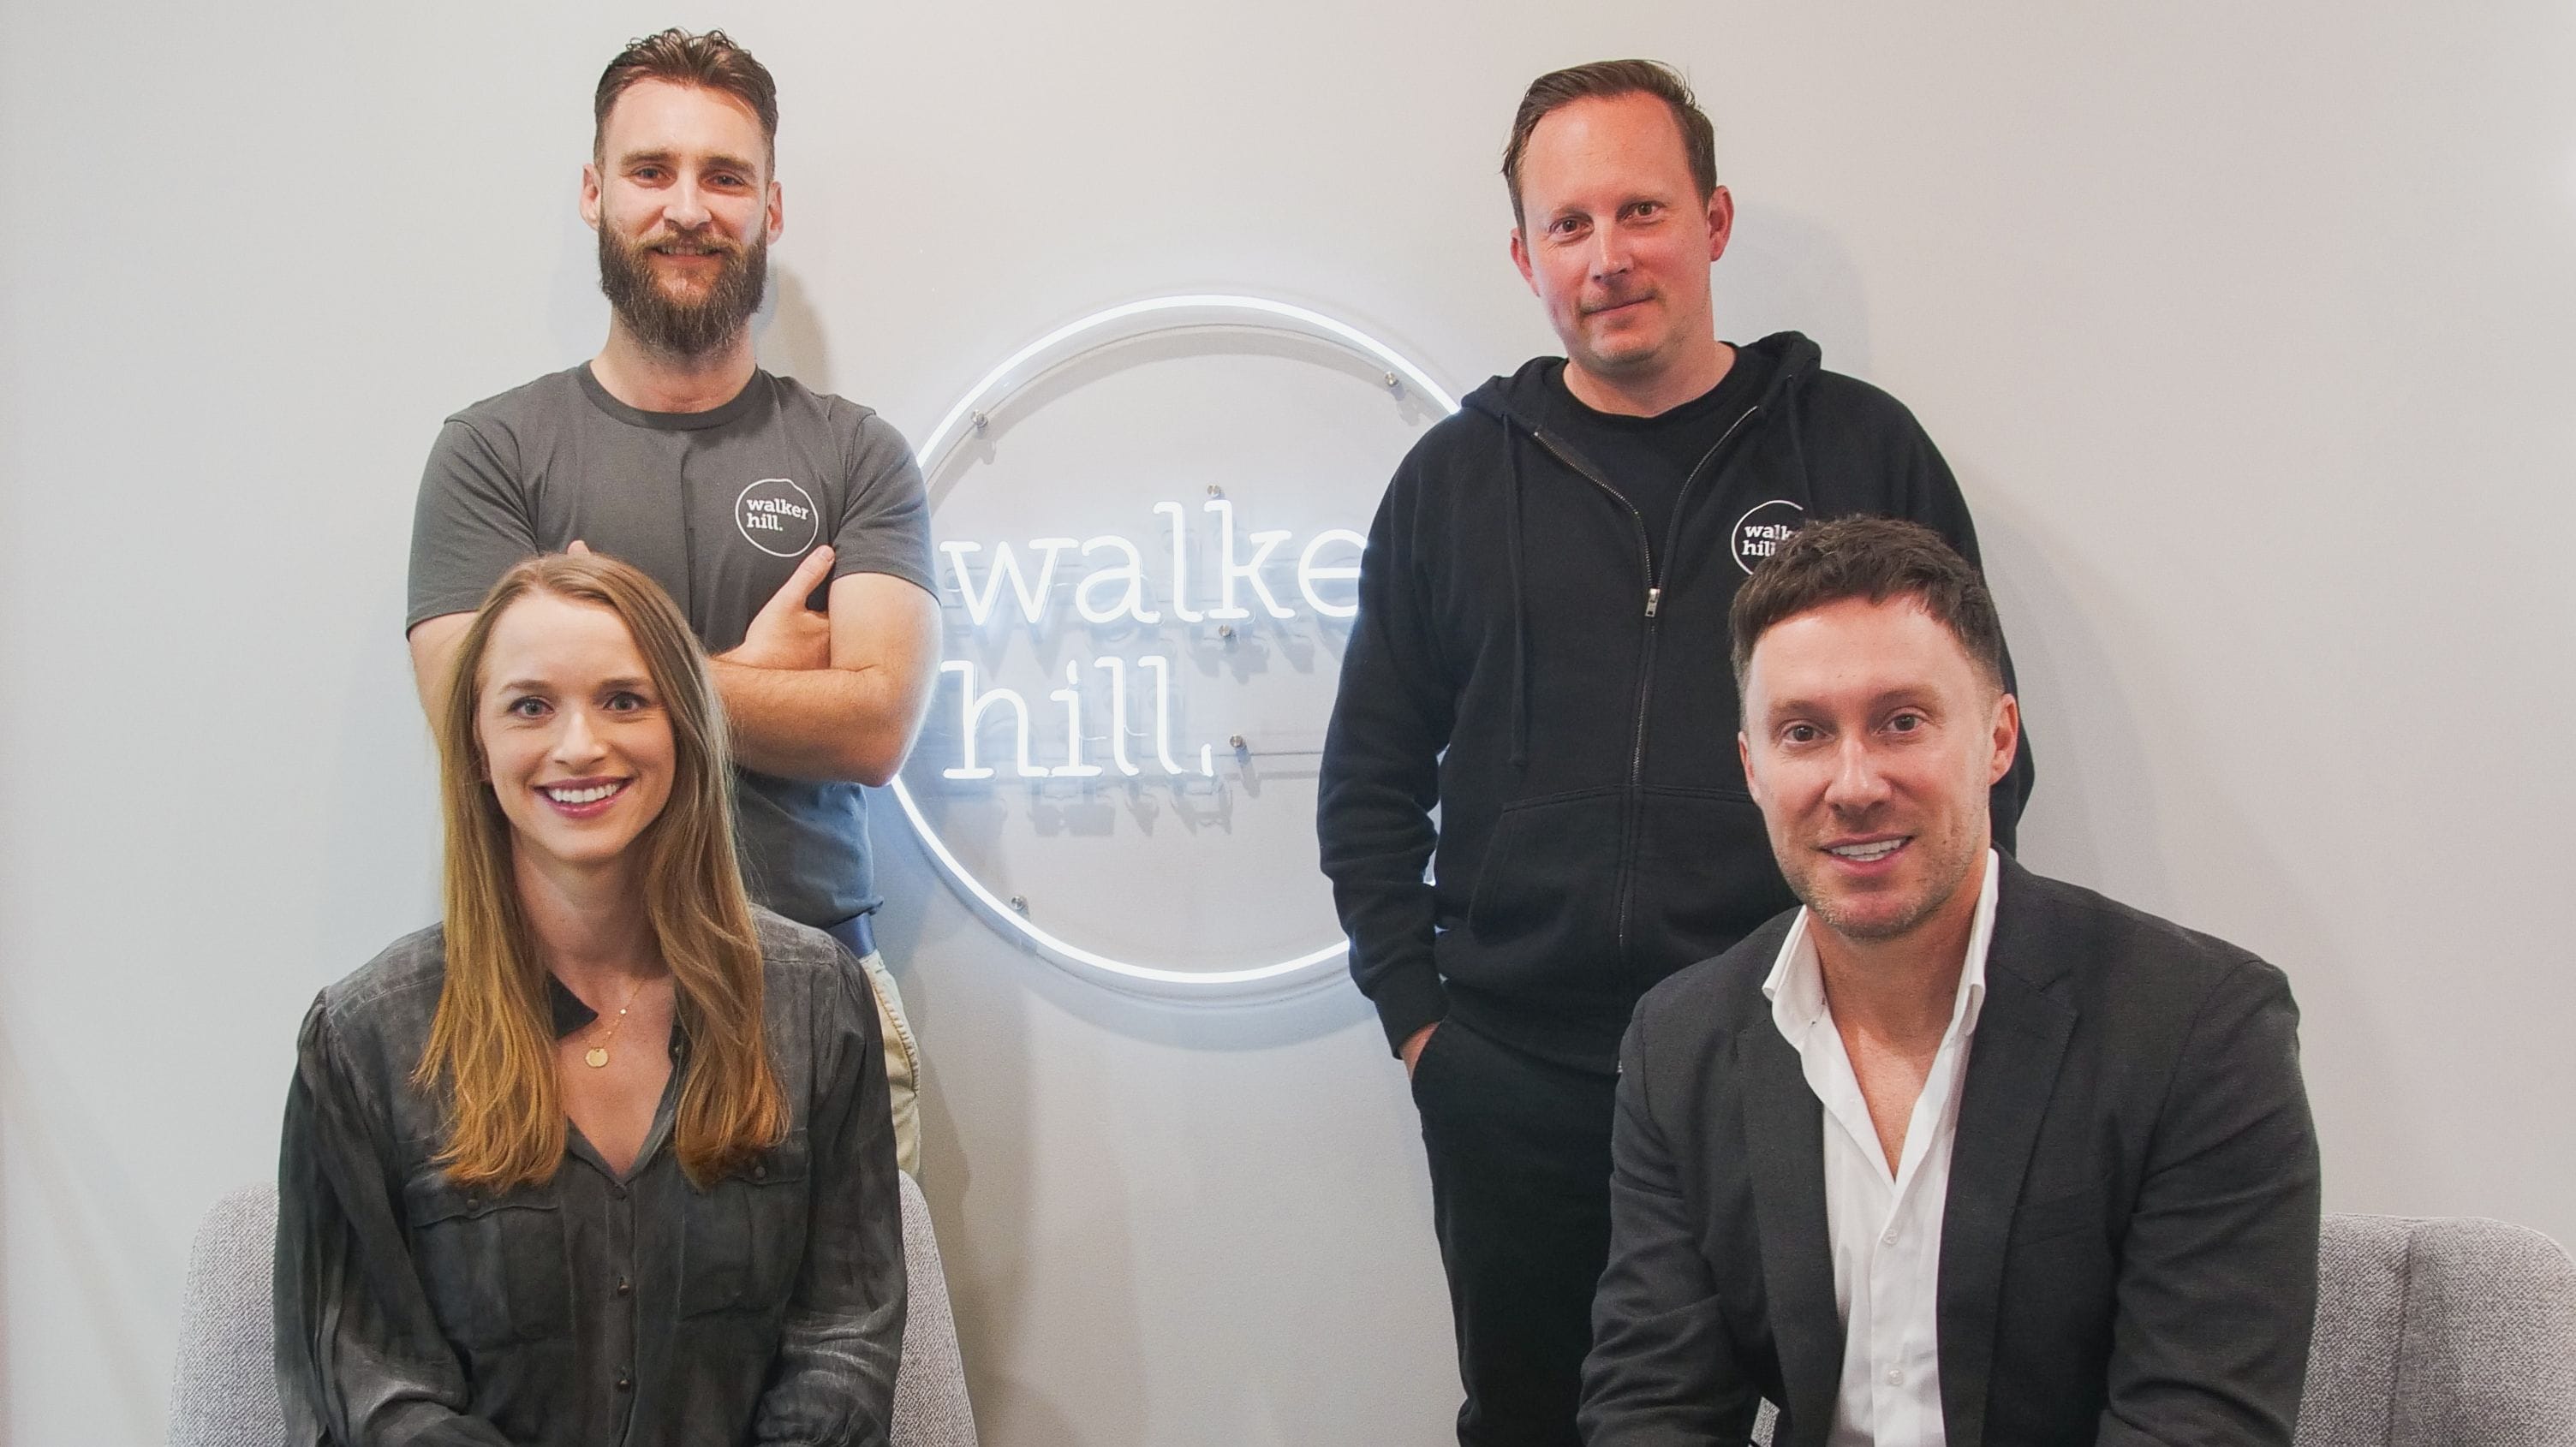 Walker Hill founders Nick Hill, Lana Hill and Andrew Walker